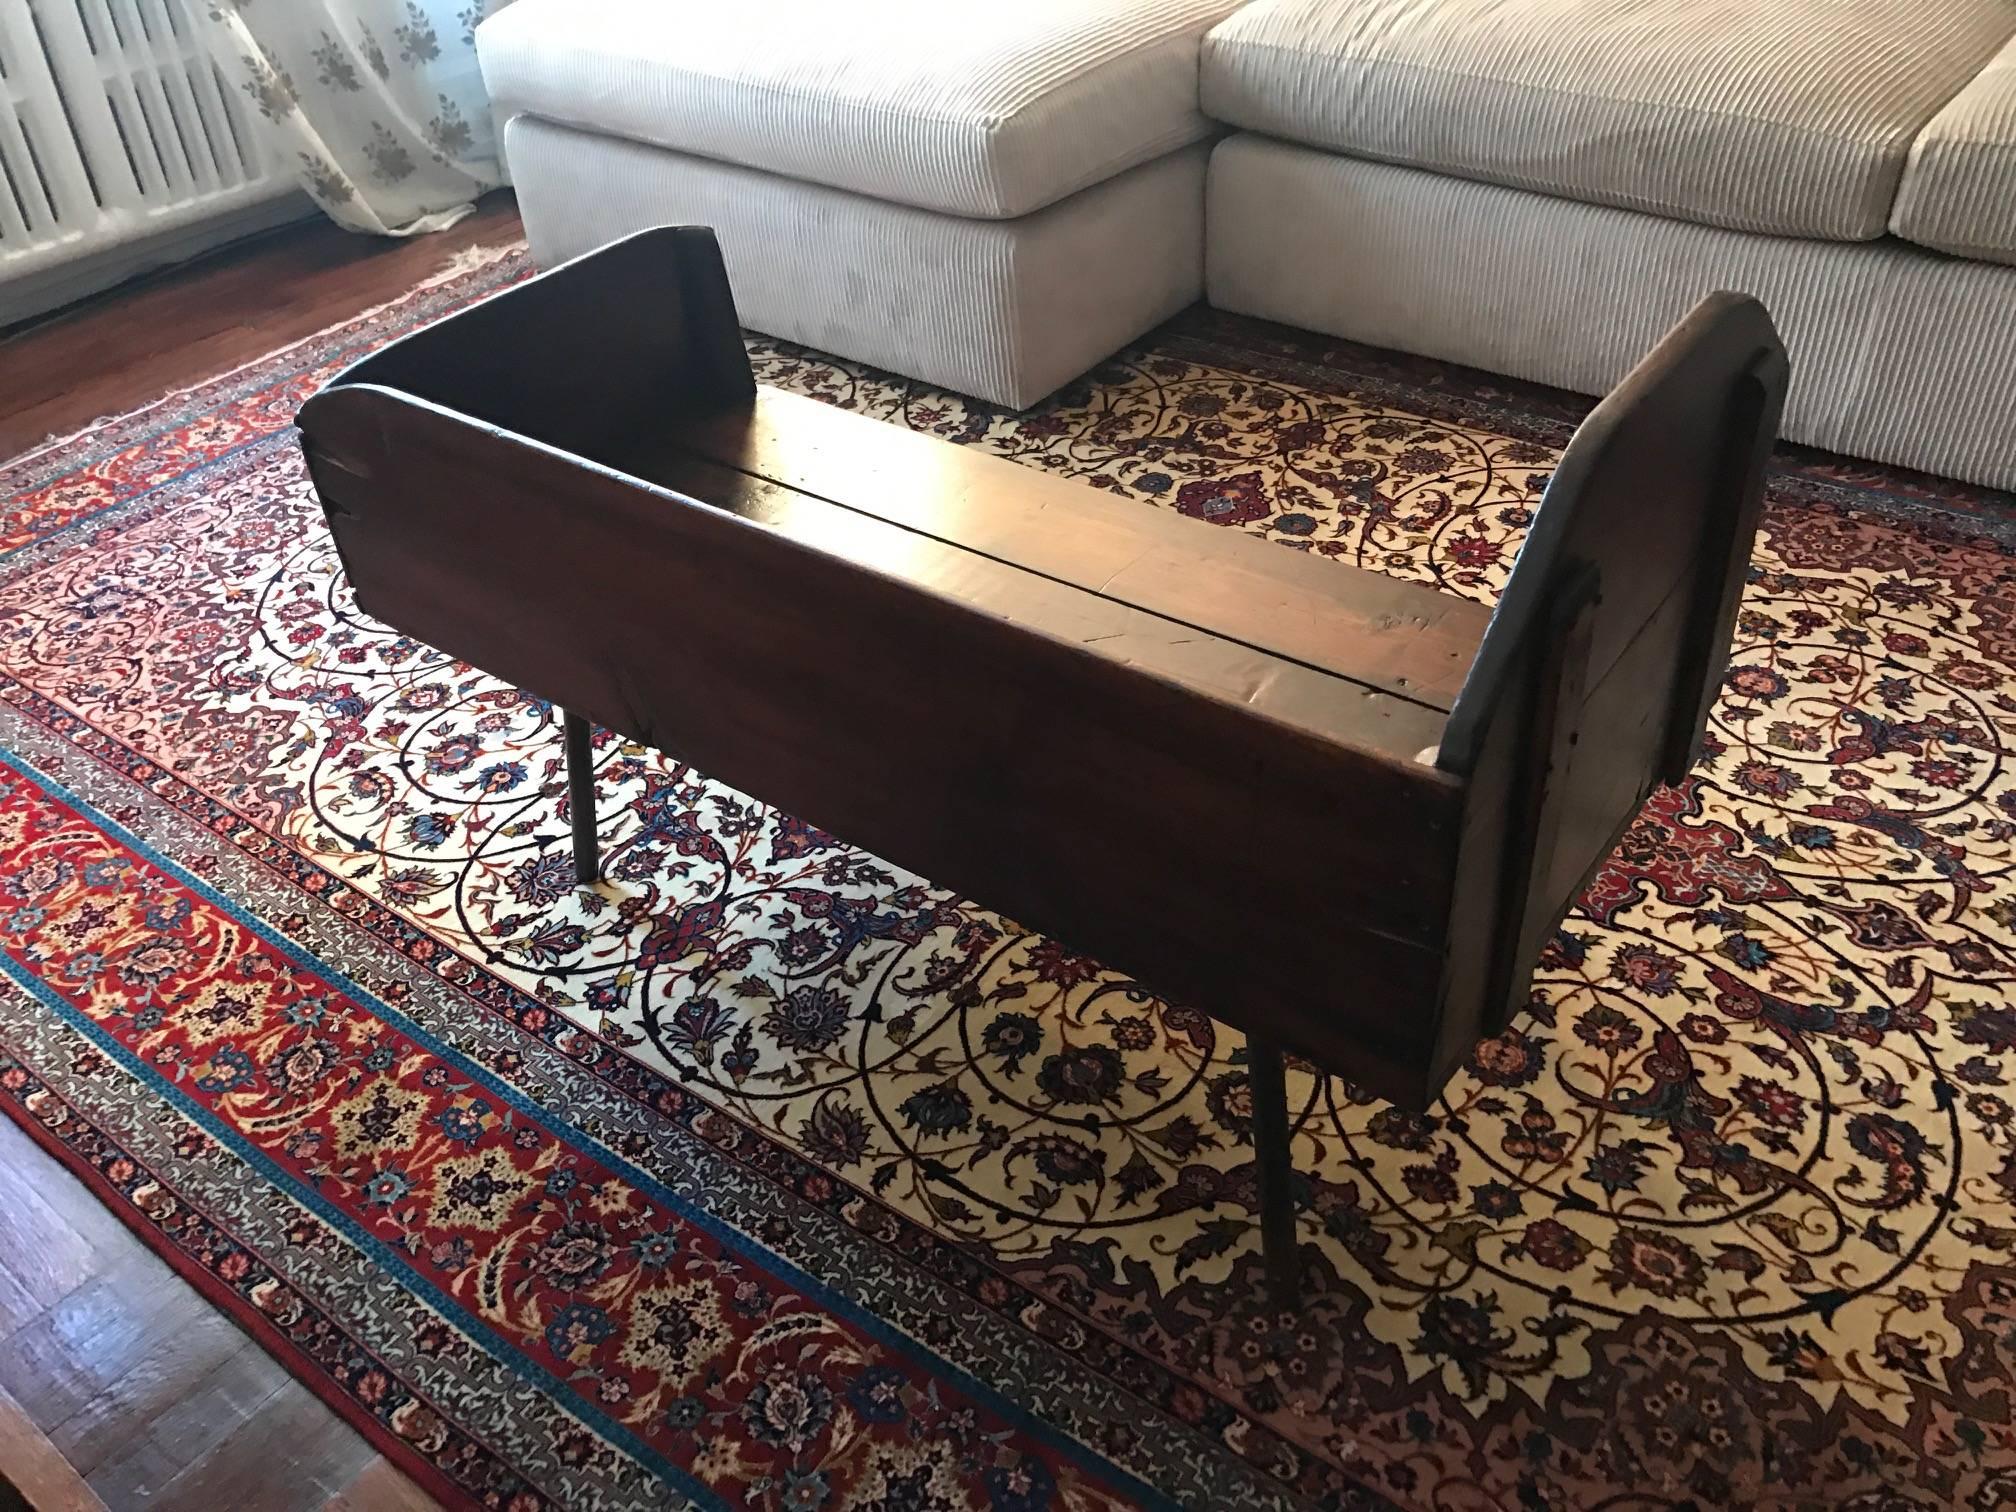 Really Cool Mahogany Vintage Cradle Made into a Cool Coffee or Center Table 3